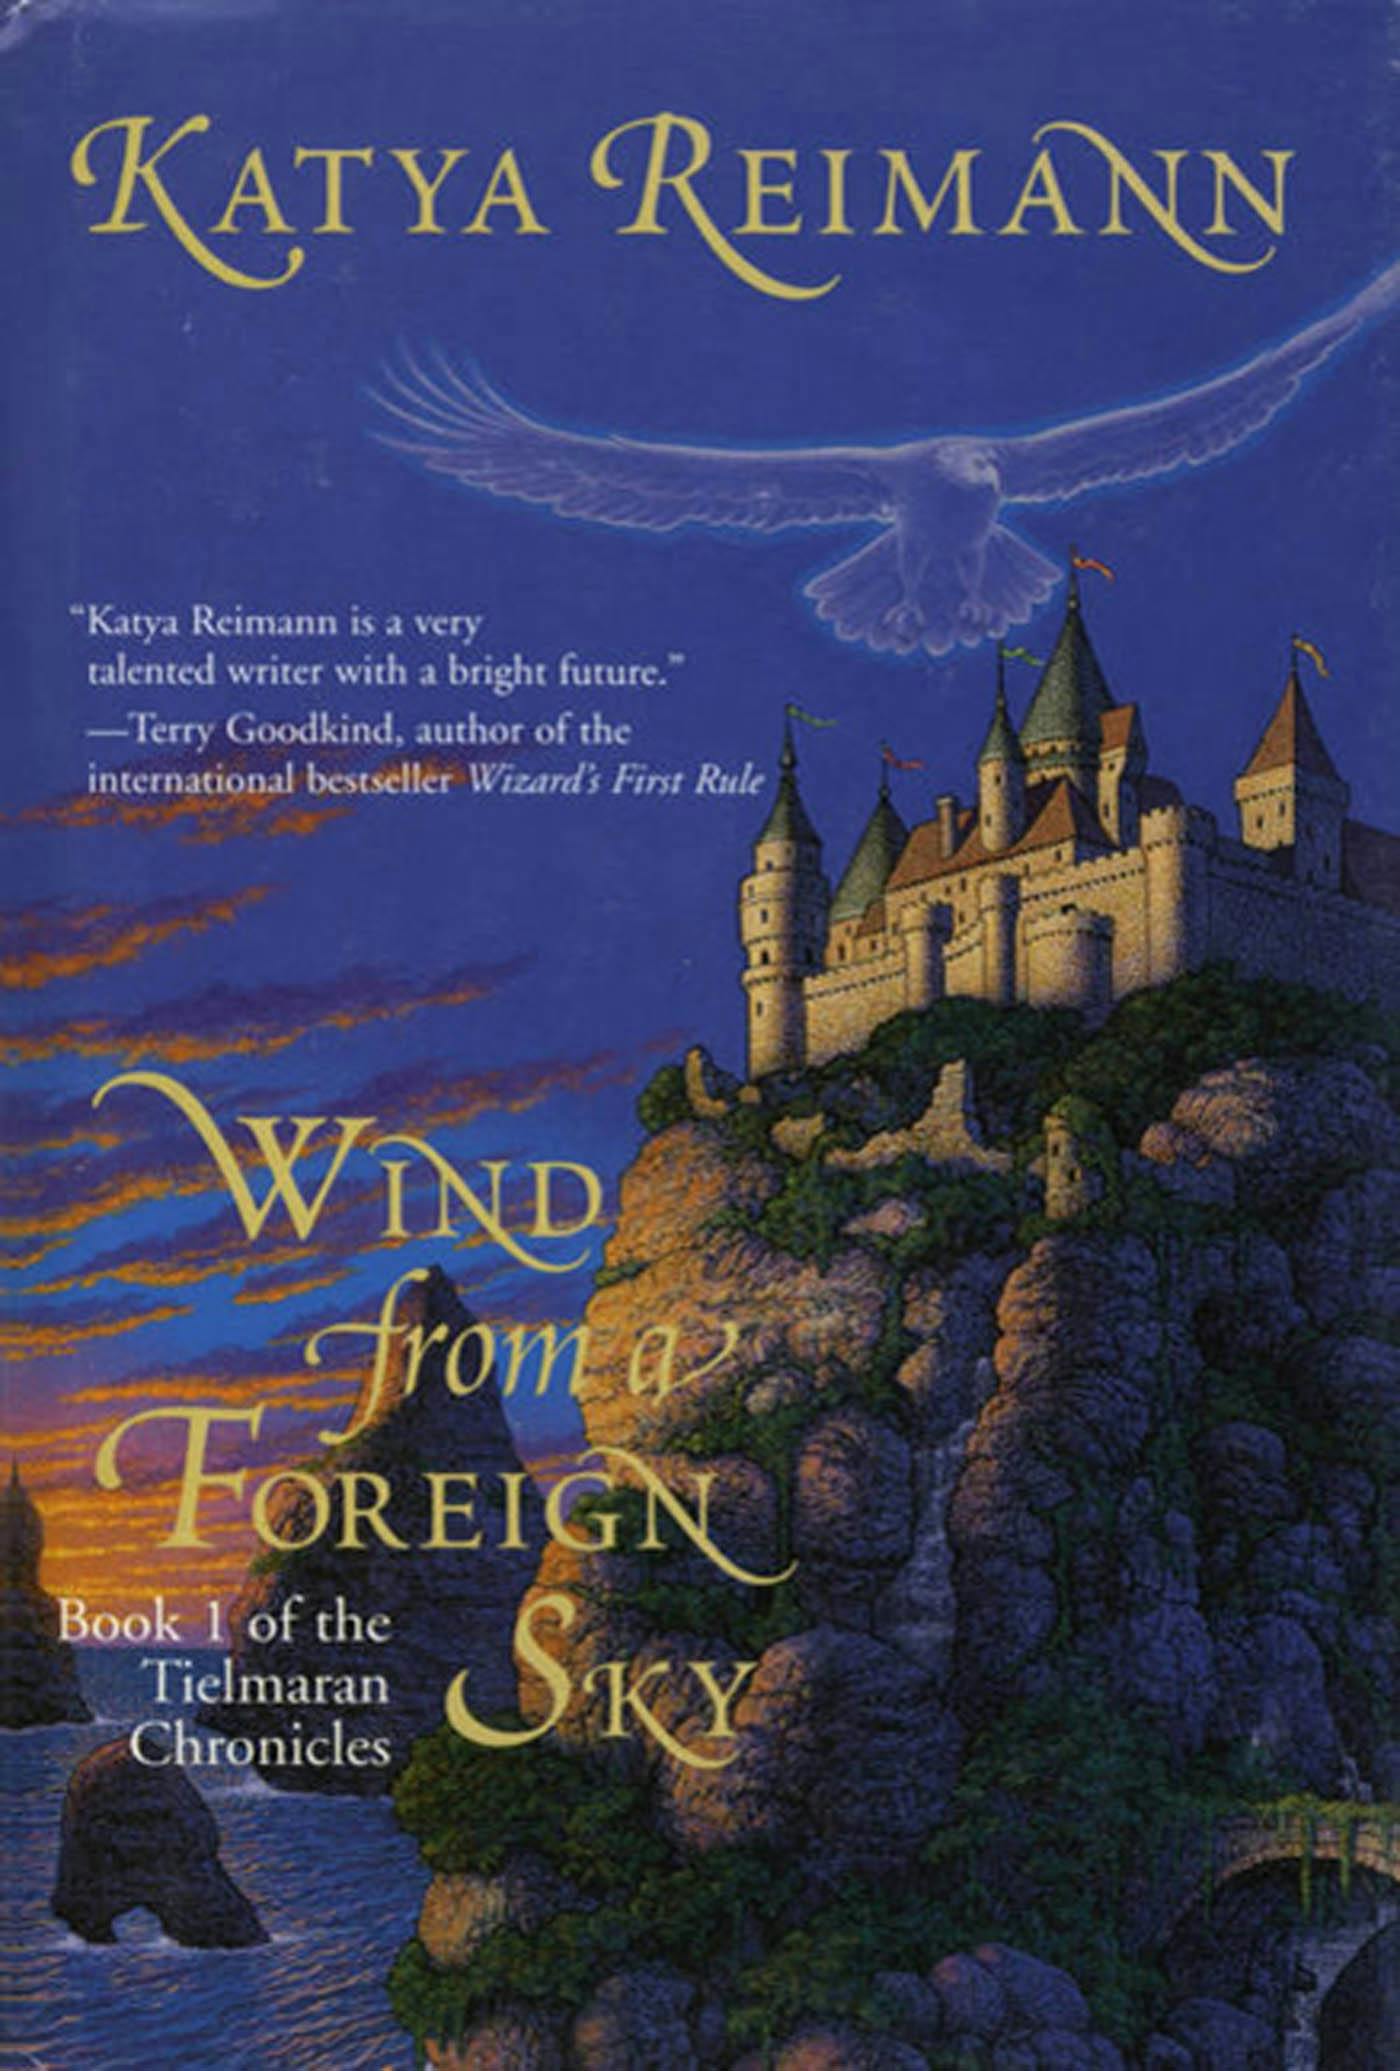 Cover for the book titled as: Wind from a Foreign Sky